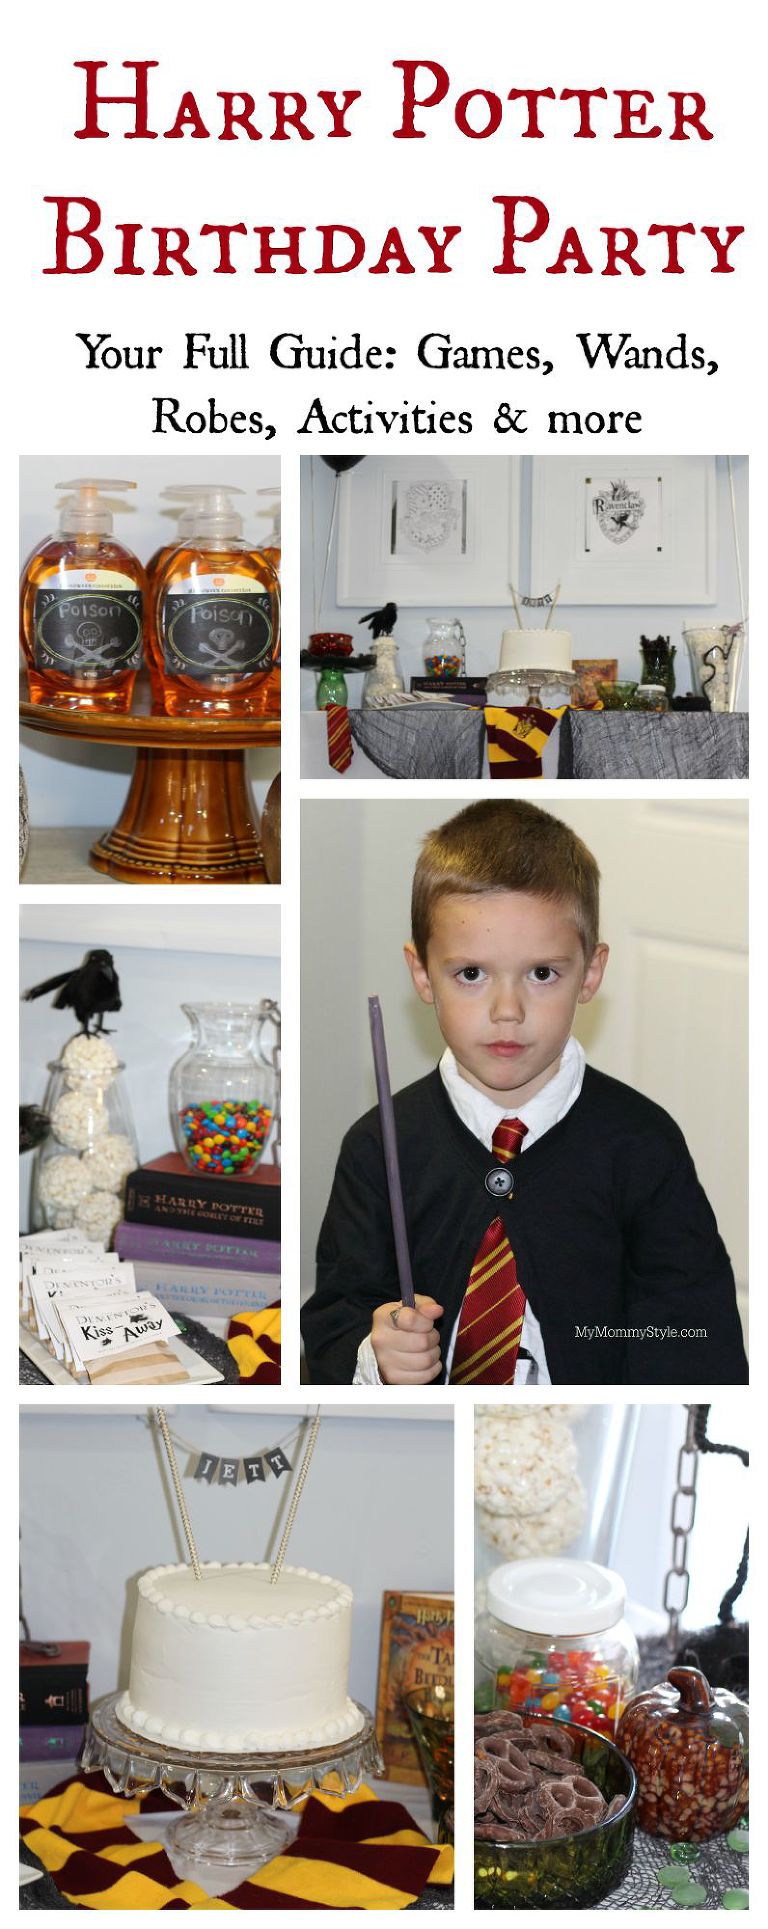 Harry Potter birthday party, harry potter, party, baby harry potter party, mymommystyle